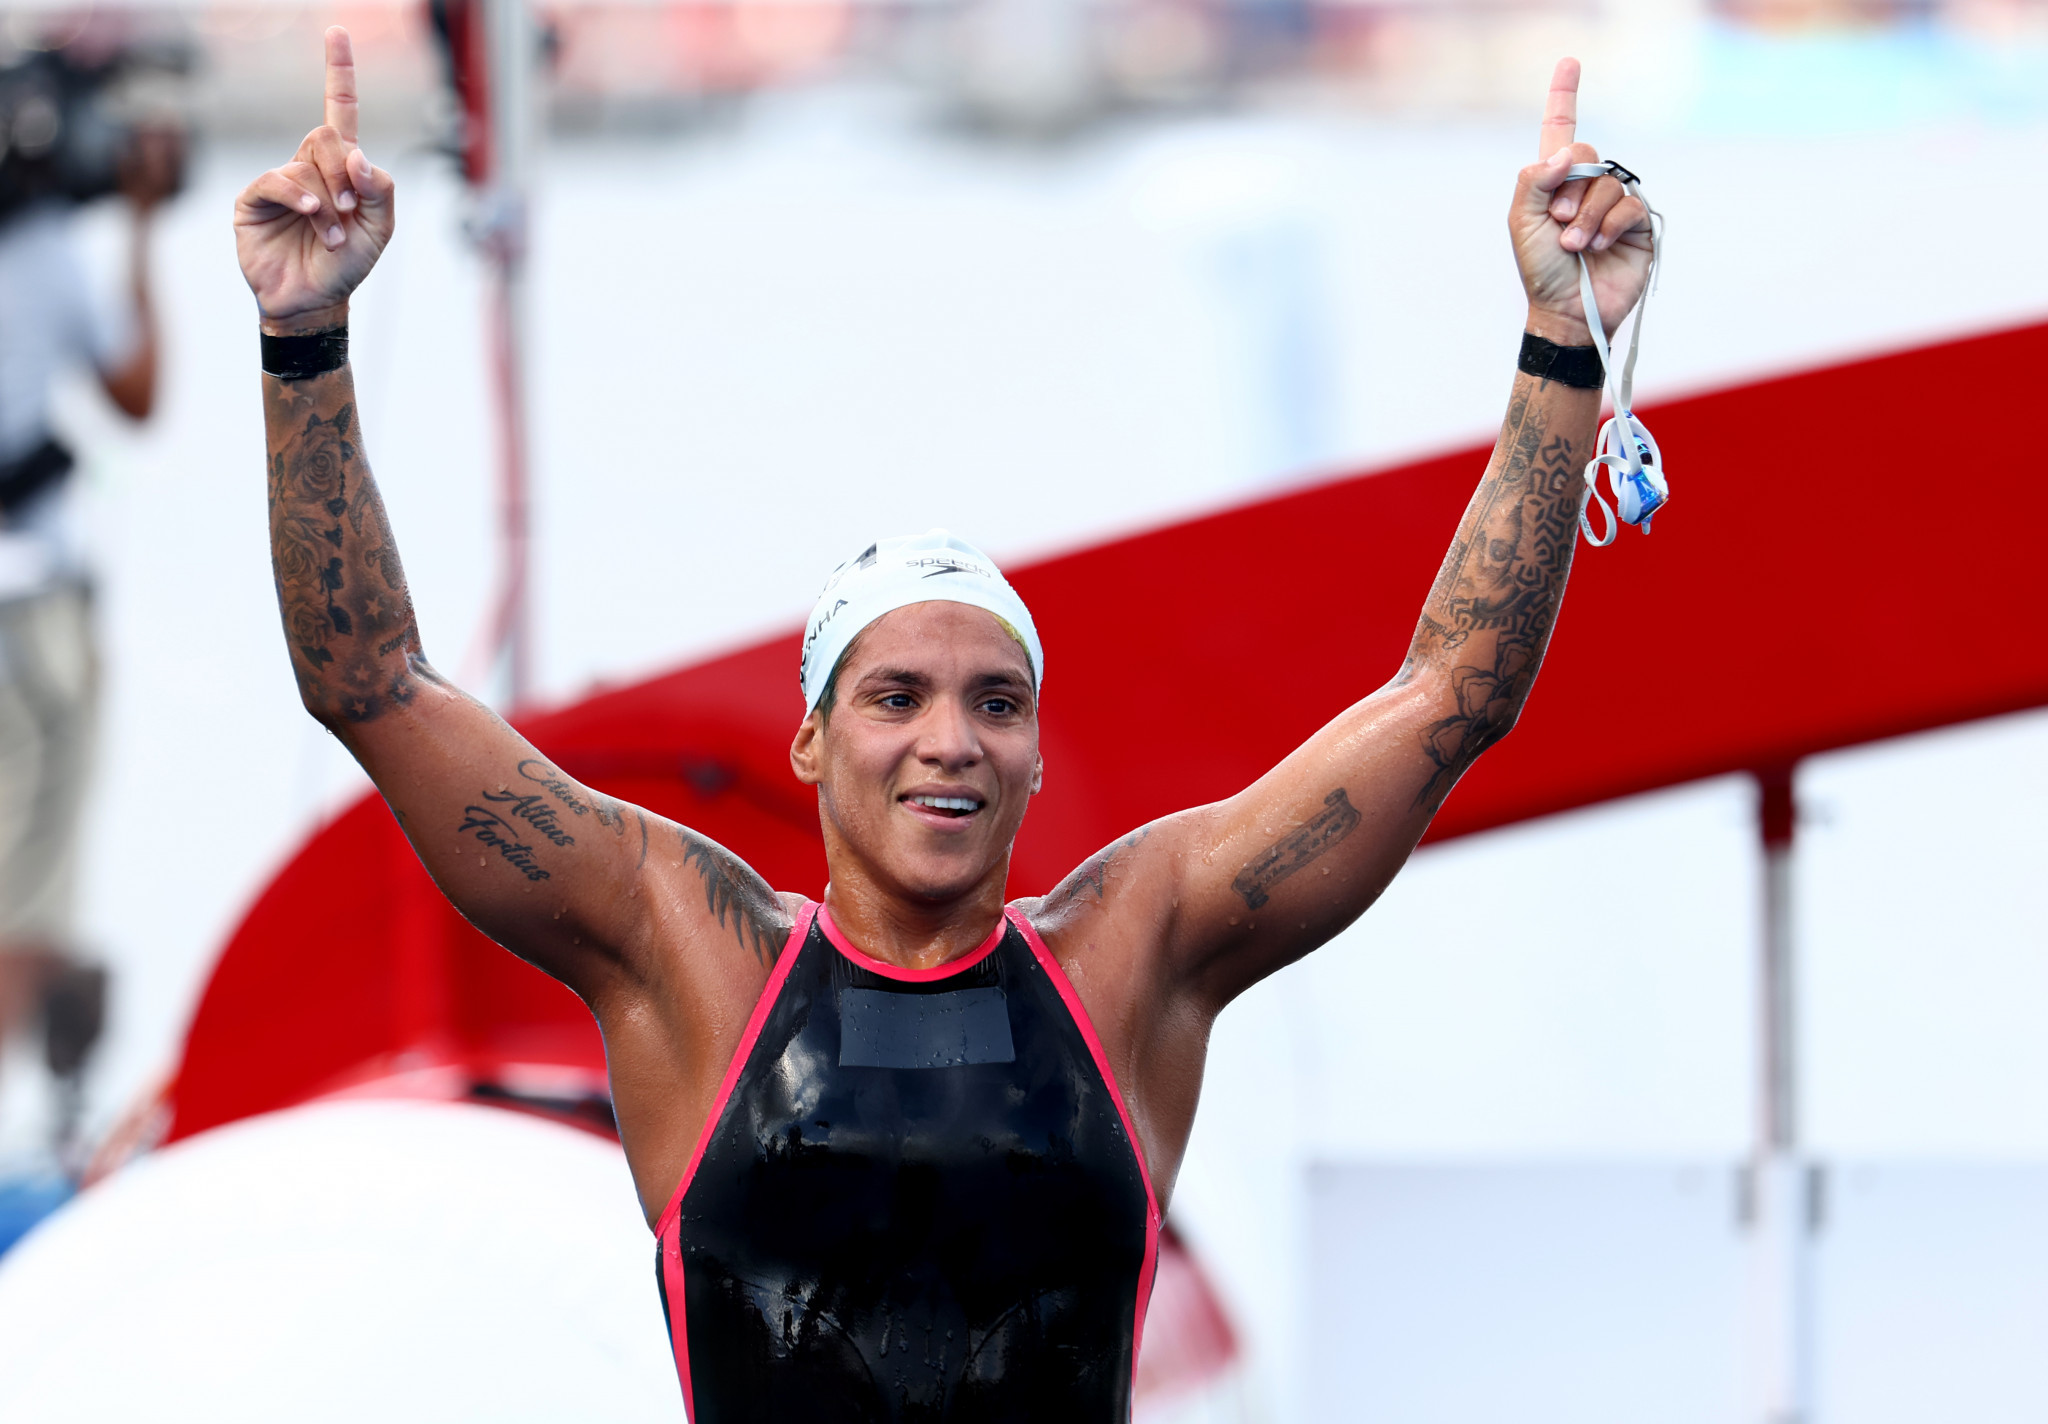 Ana Marcela Cunha has been nominated for the Inspire 2021 Award, thanks in part to her gold medal triumph in the women's 10-kilometres open water swim at Tokyo 2020 ©Getty Images